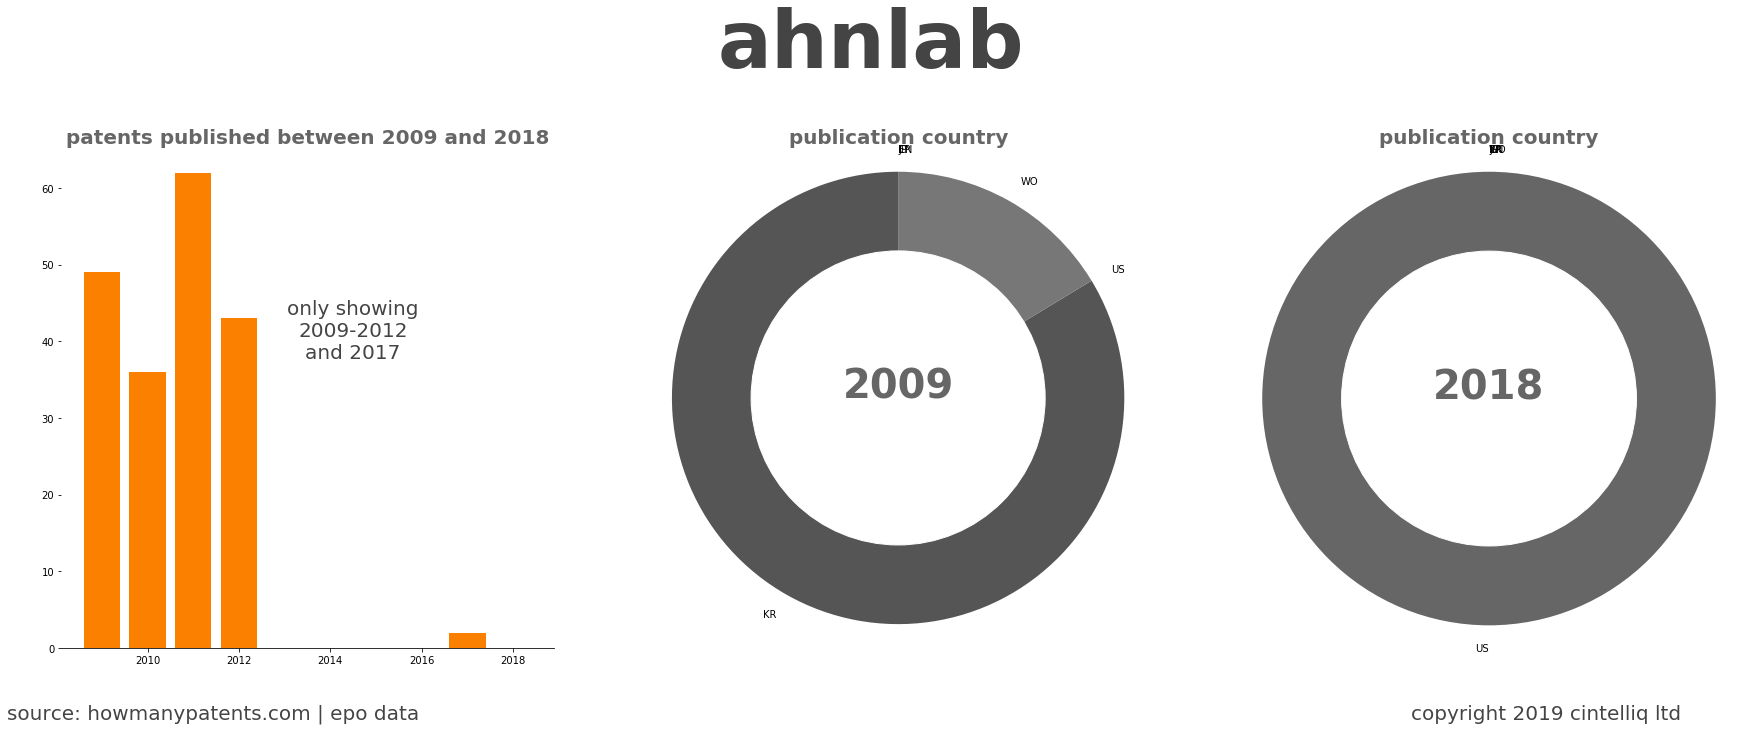 summary of patents for Ahnlab